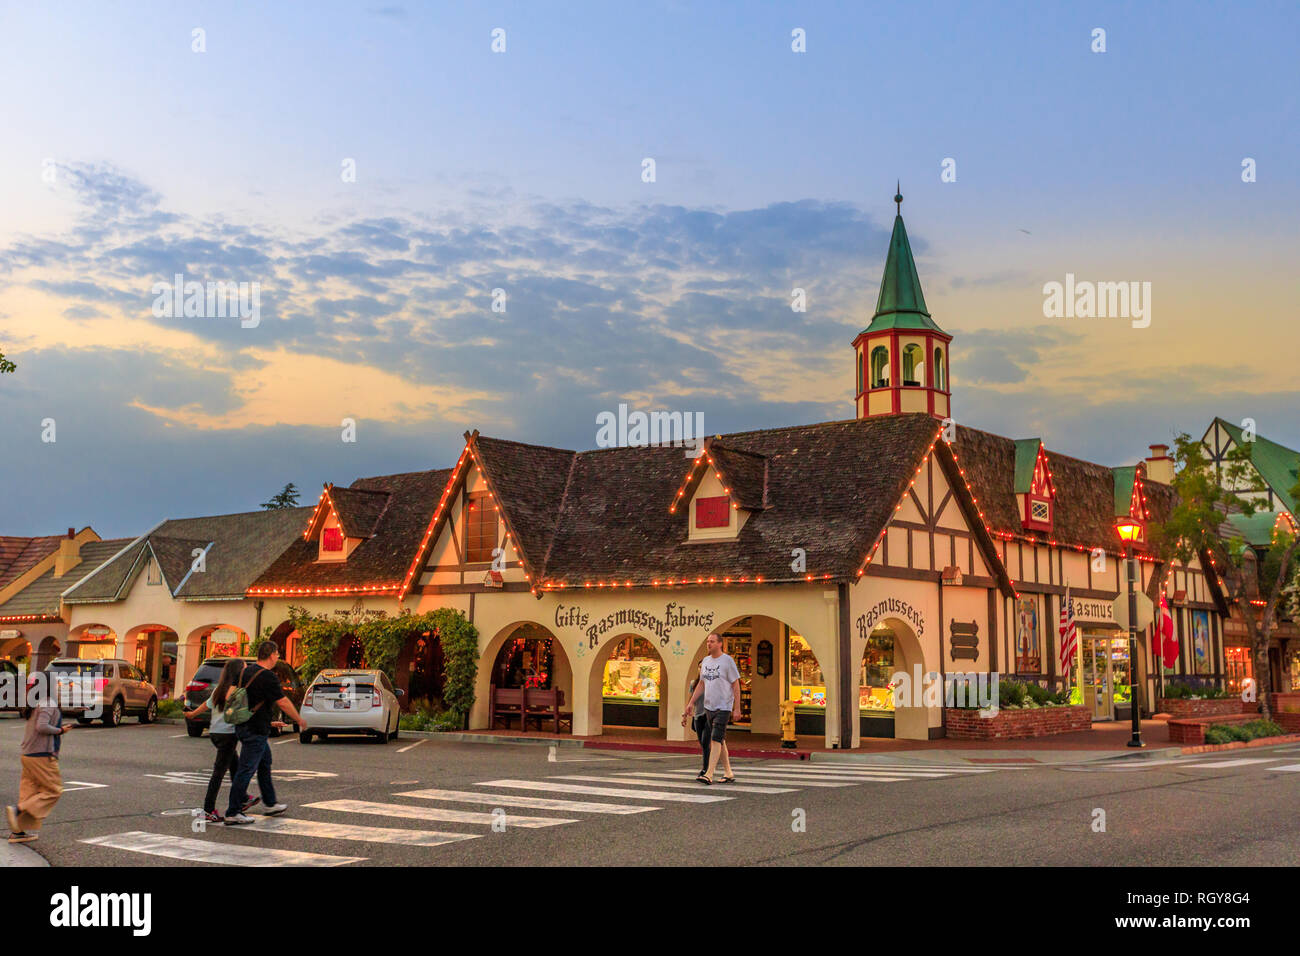 Gift solvang Welcome to